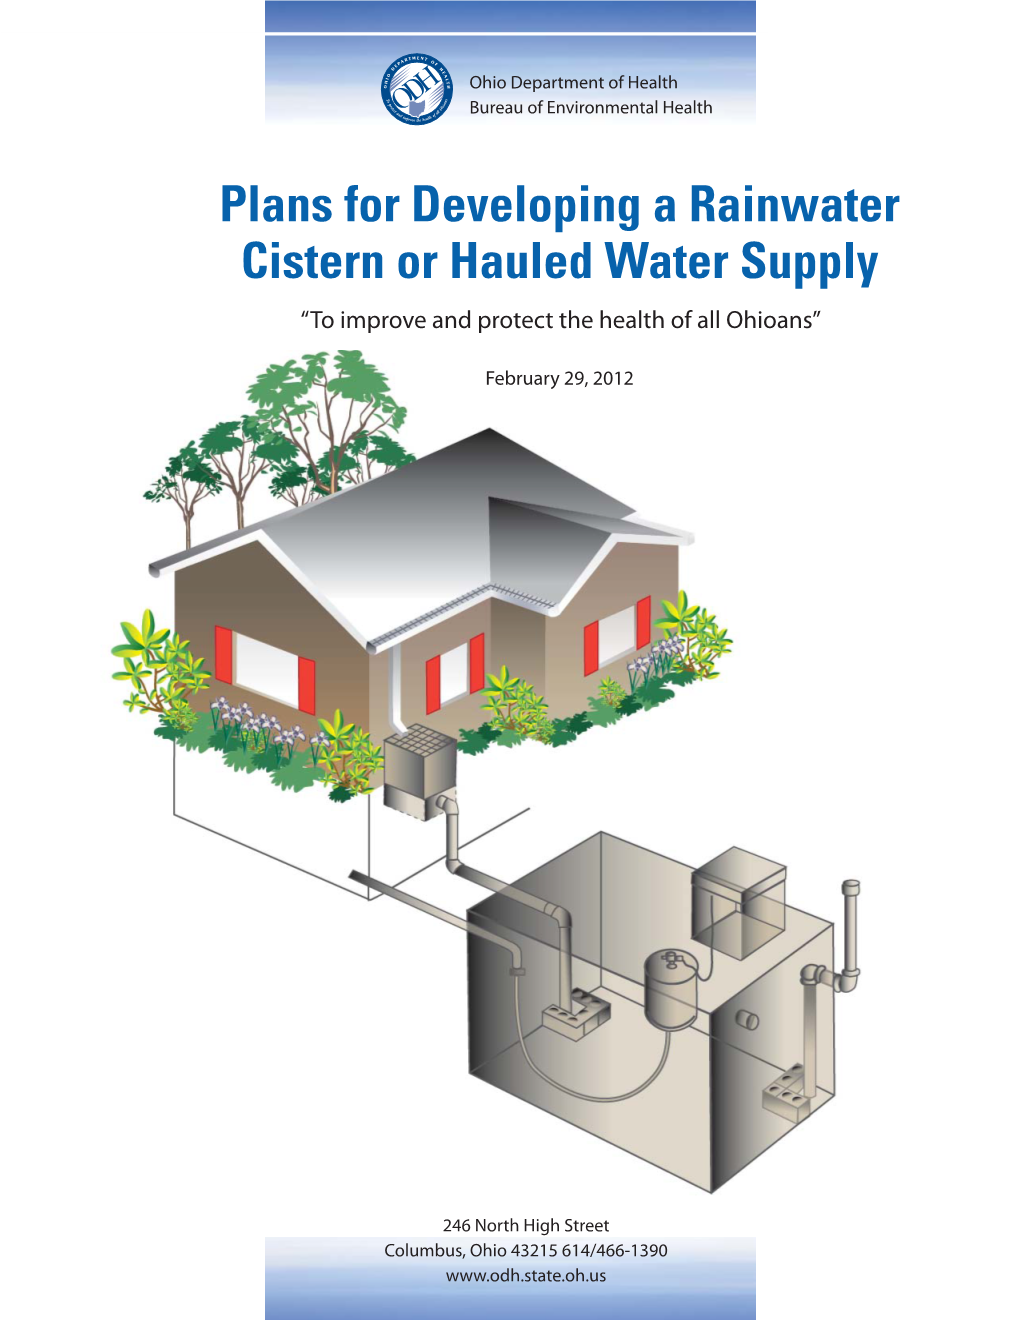 Plans for Developing a Rainwater Cistern of Hauled Water Supply